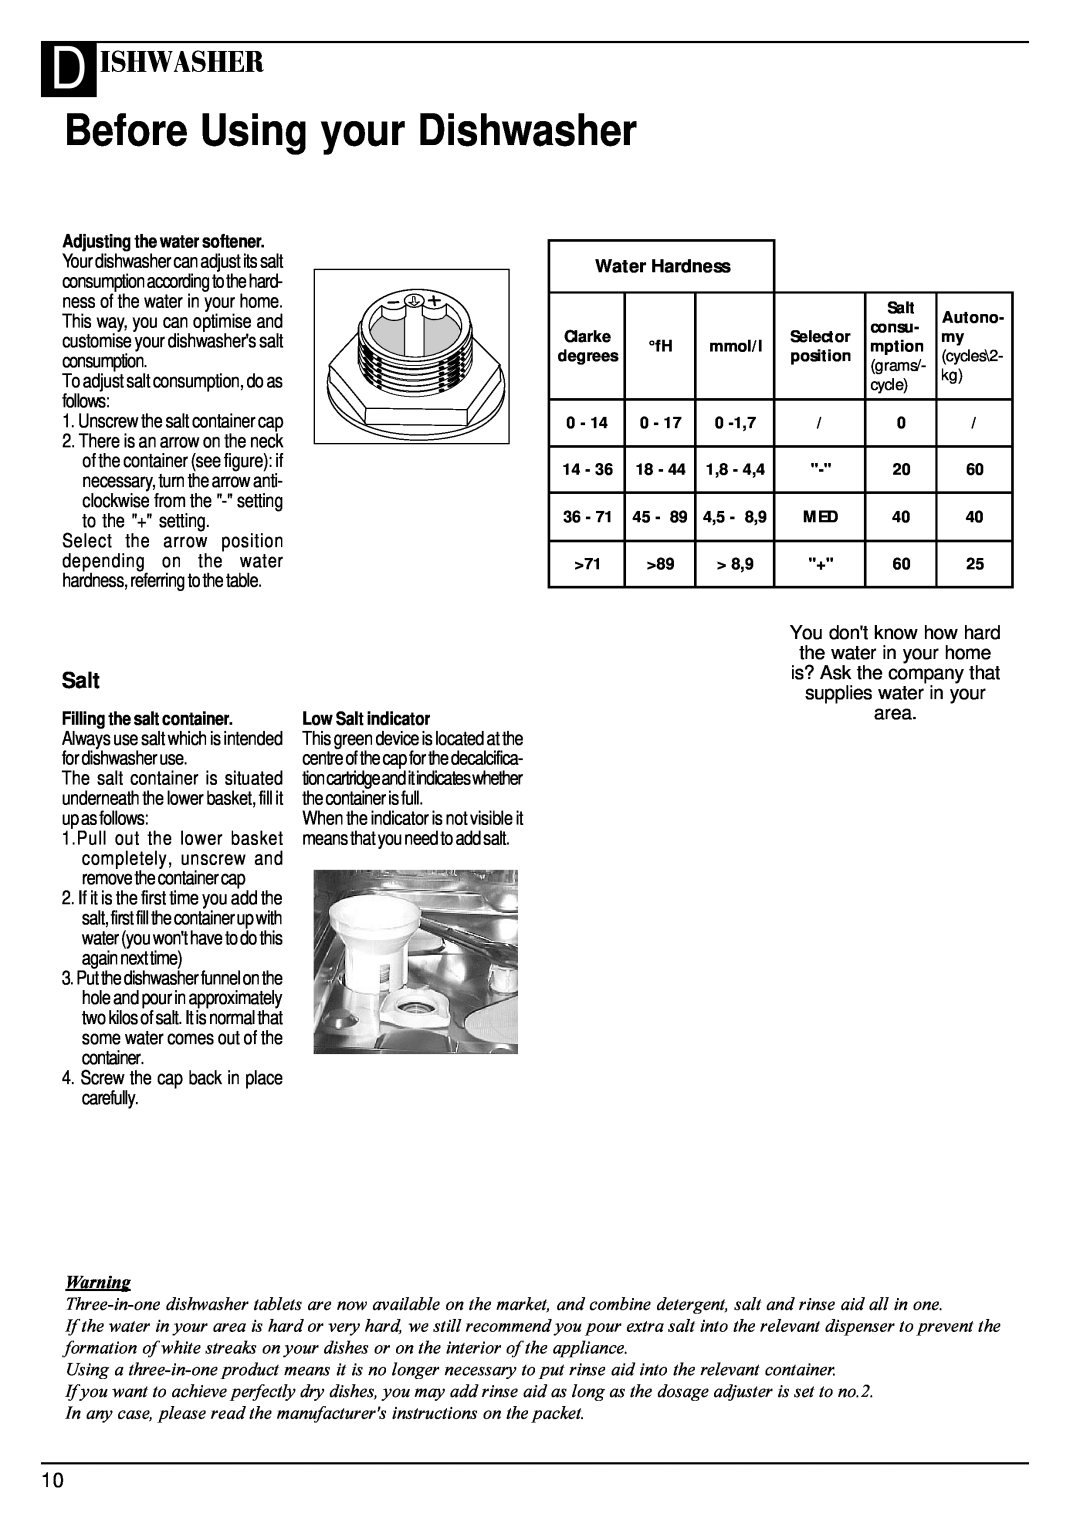 Hotpoint BFV620 manual Before Using your Dishwasher, D Ishwasher, Salt, Unscrew the salt container cap, Water Hardness 